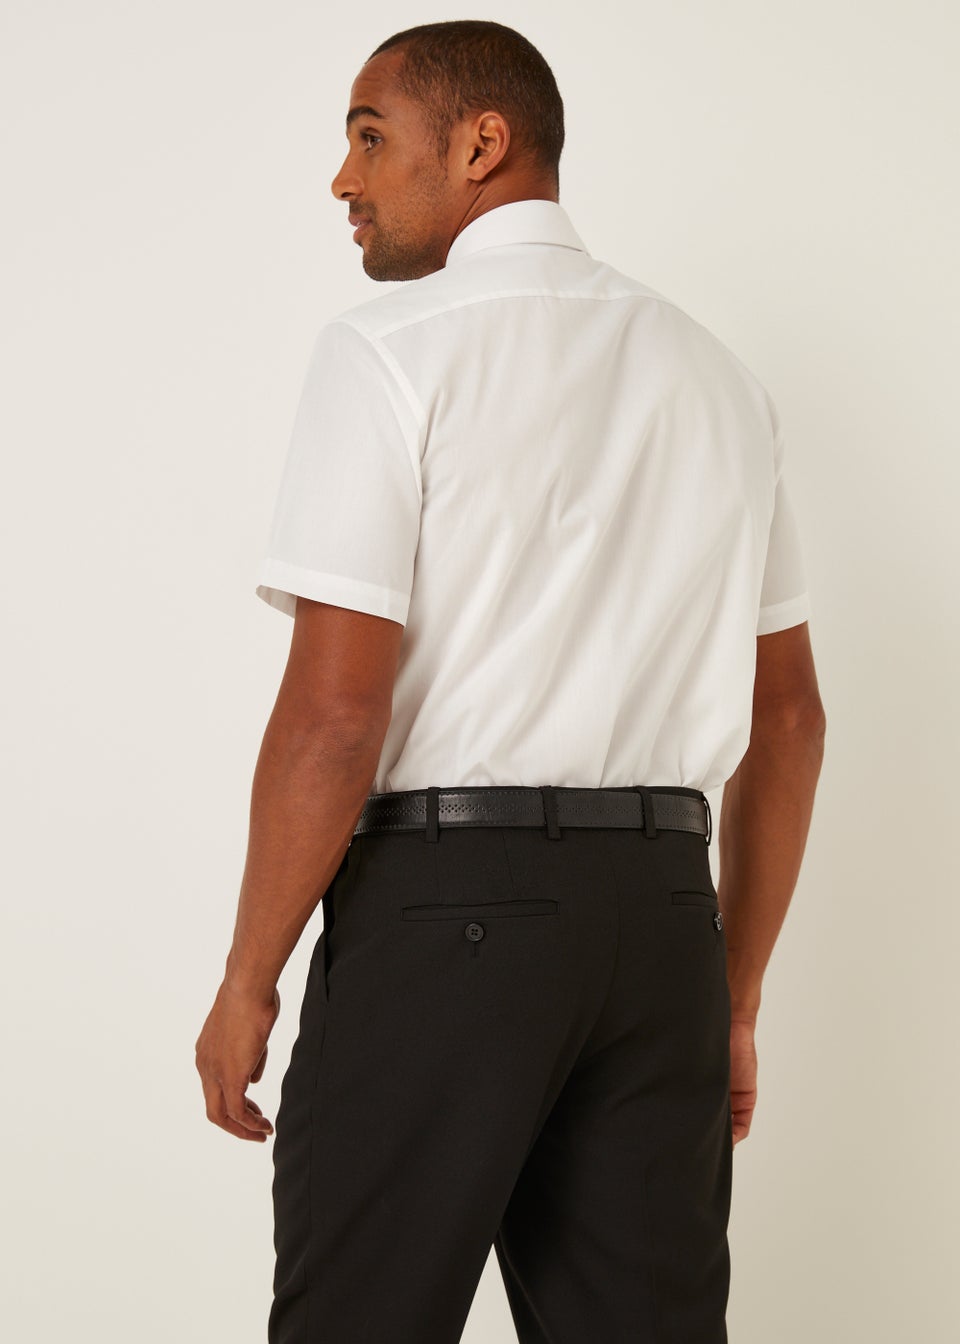 Taylor & Wright White Easy Care Regular Fit Shirt